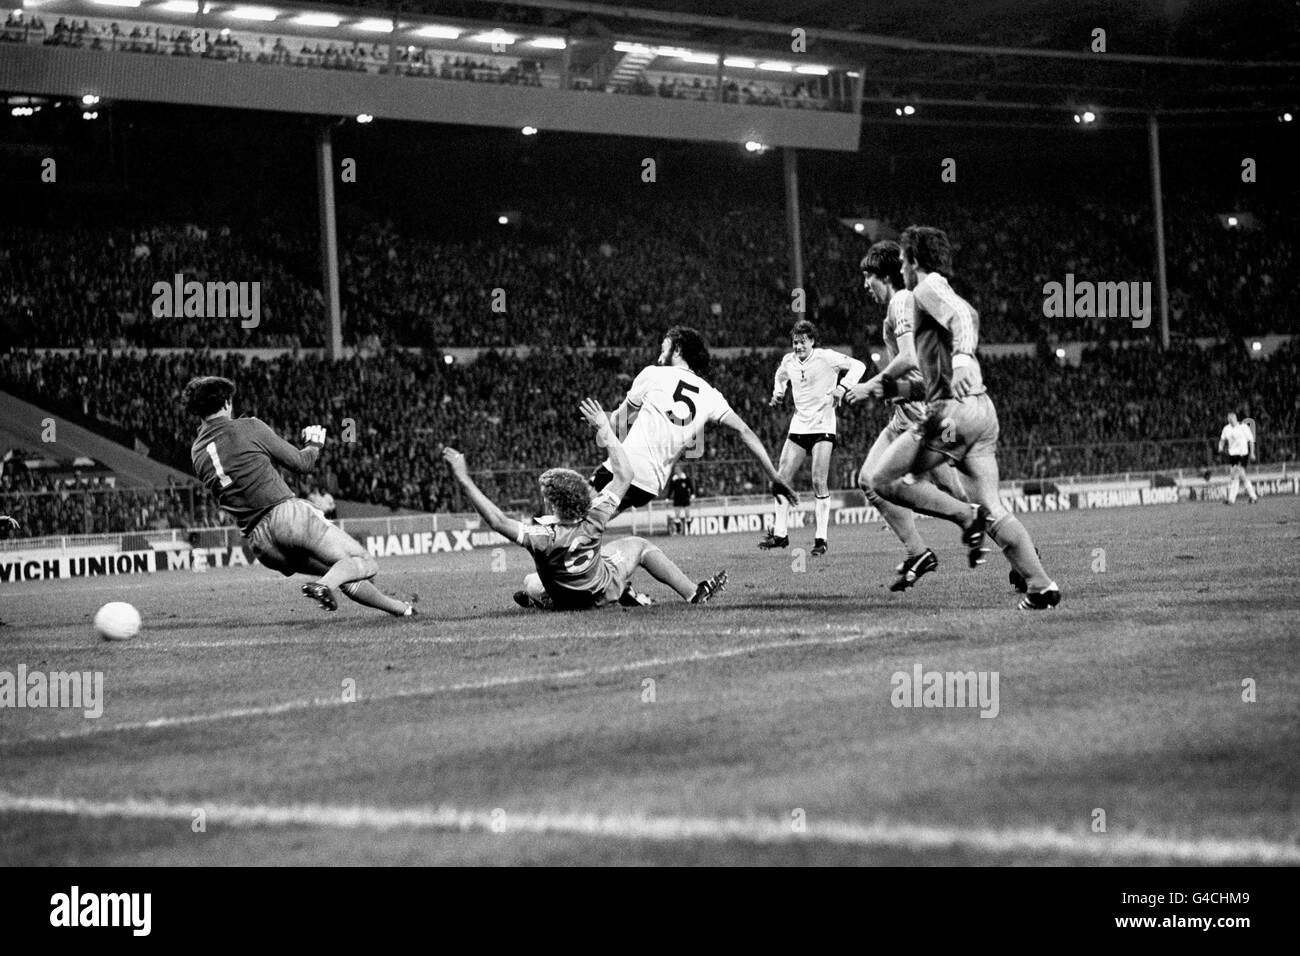 PA NEWS PHOTO 14/5/81 RICARDO VILLA (NO.5 SHIRT) SLIDES THE BALL PAST GOALKEEPER JOE CORRIGAN TO SCORE THE WINNING GOAL FOR TOTTENHAM HOTSPUR AFTER THEY BEAT MANCHESTER CITY 3-2 IN THE FINAL AT WEMBLEY, LONDON Stock Photo